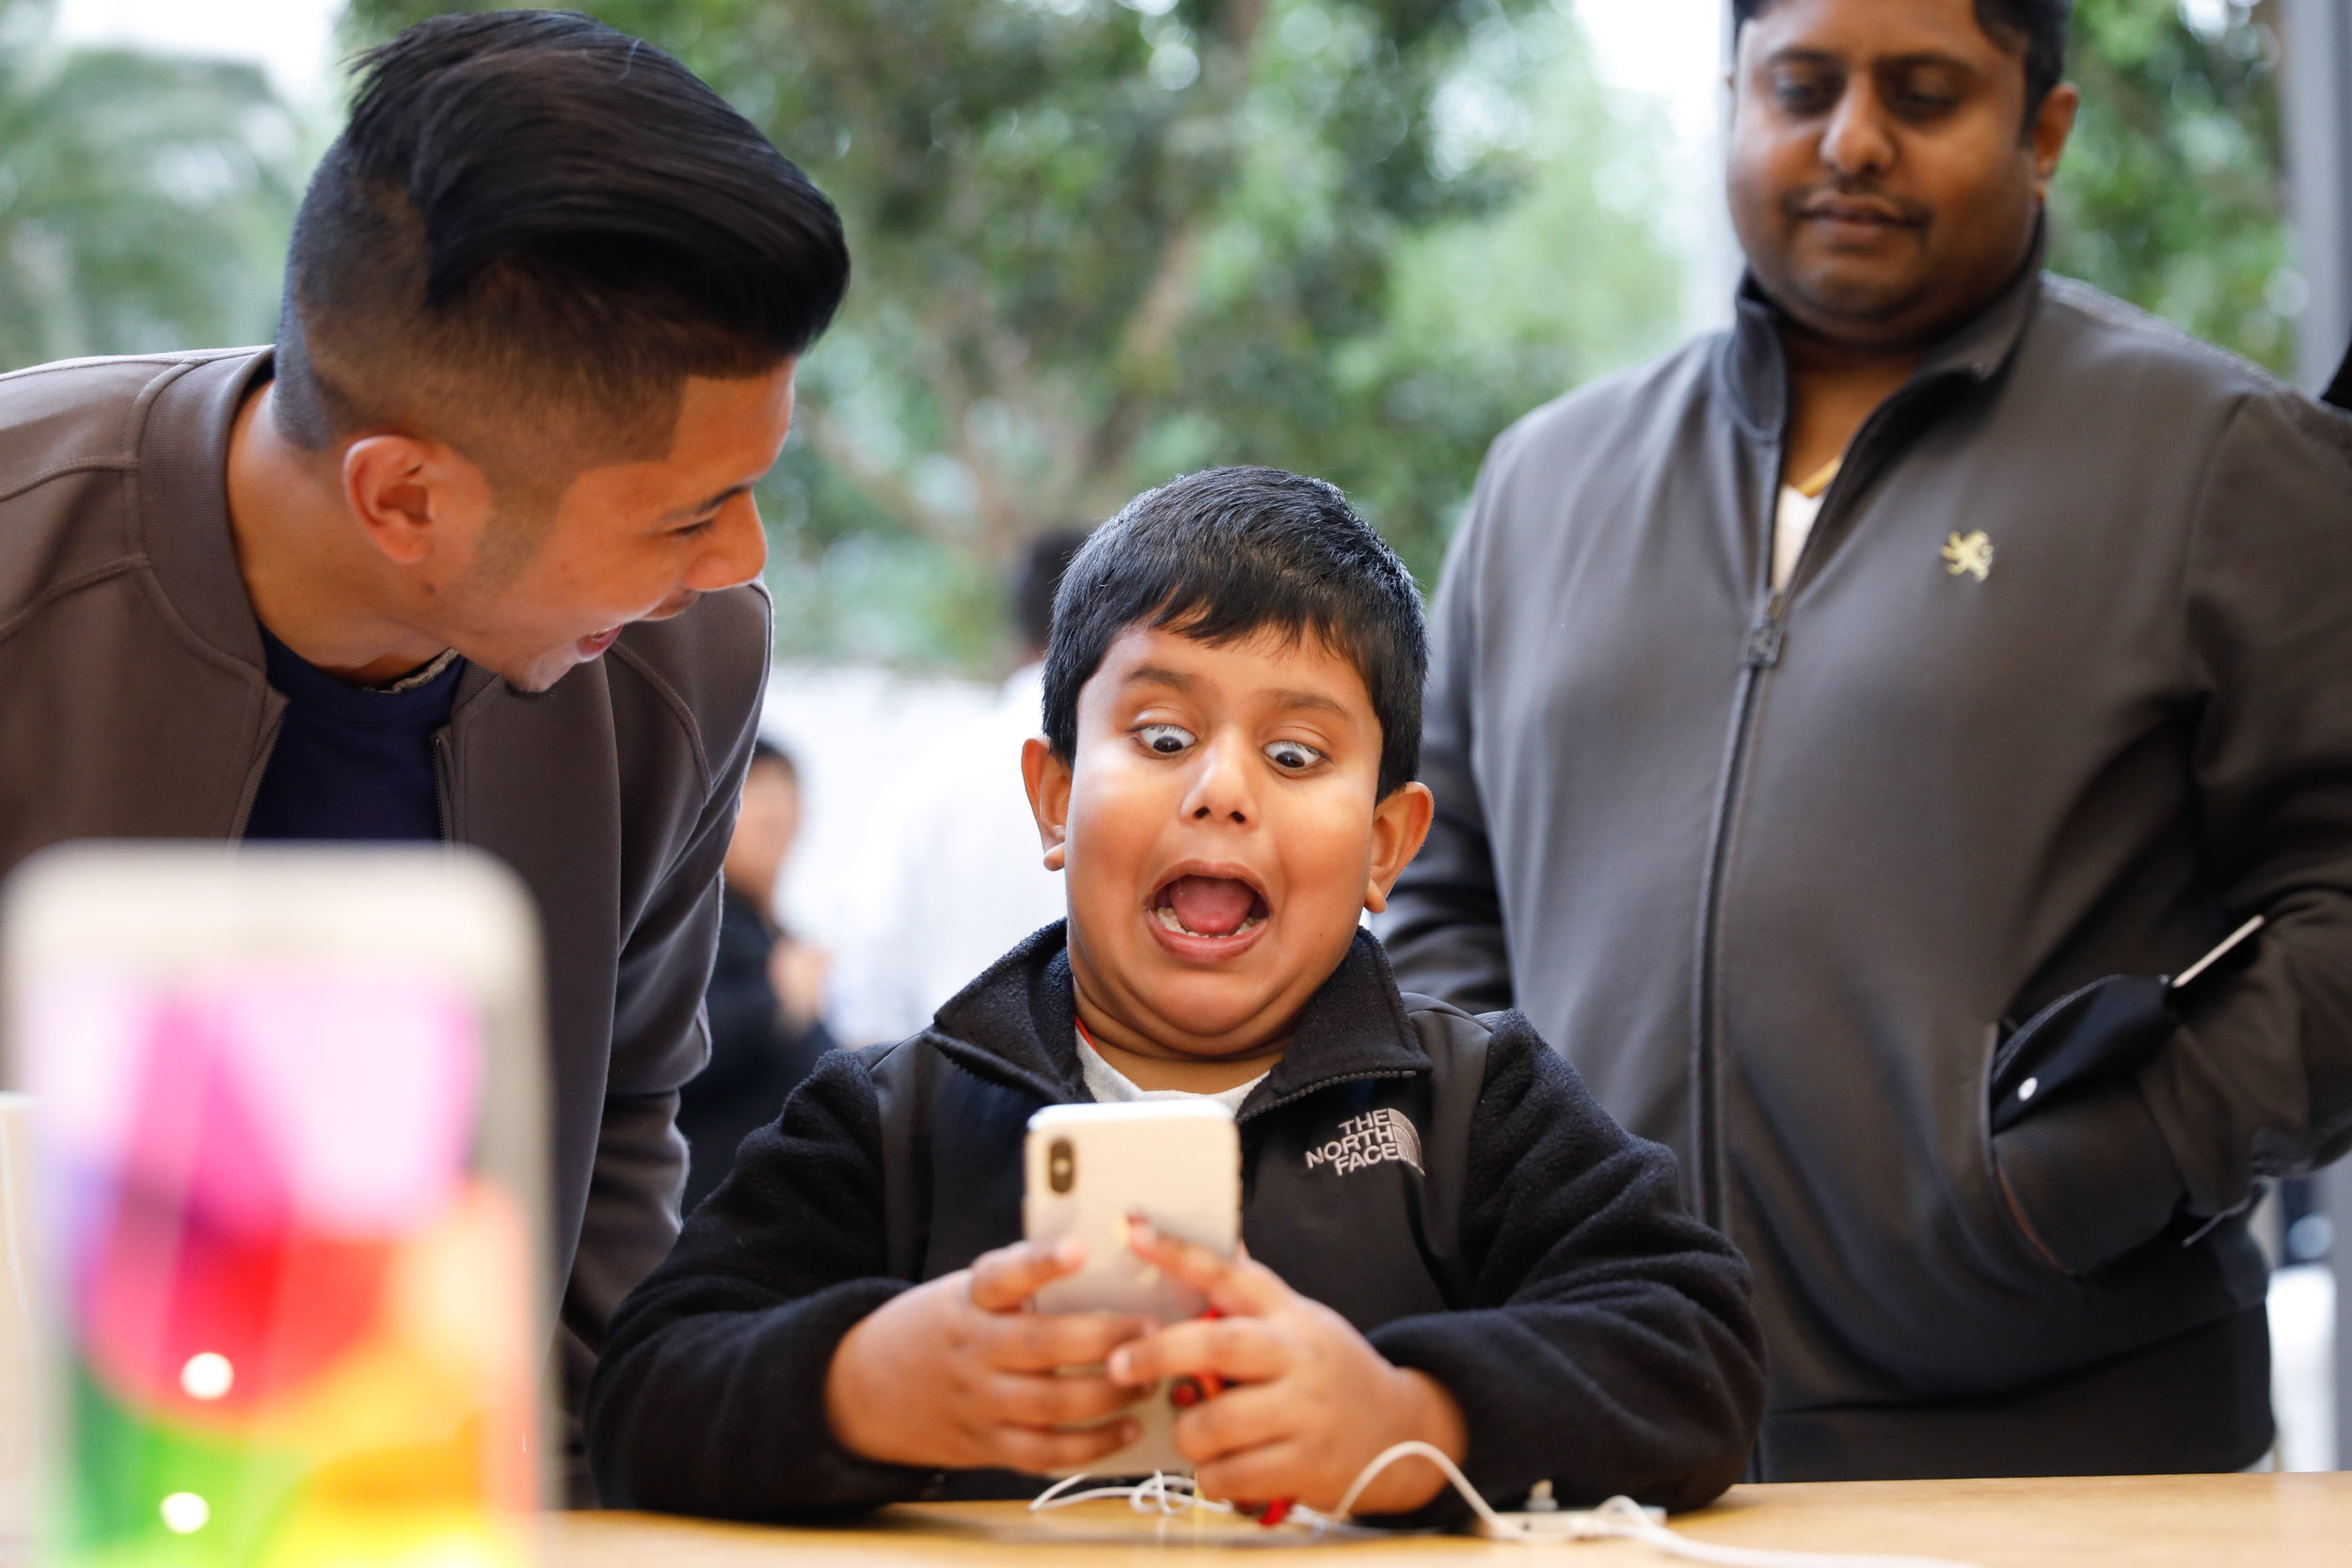  A boy uses the Animoji feature of the iPhone X on the first day of sales at the Apple Store Union Square in San Francisco, California 